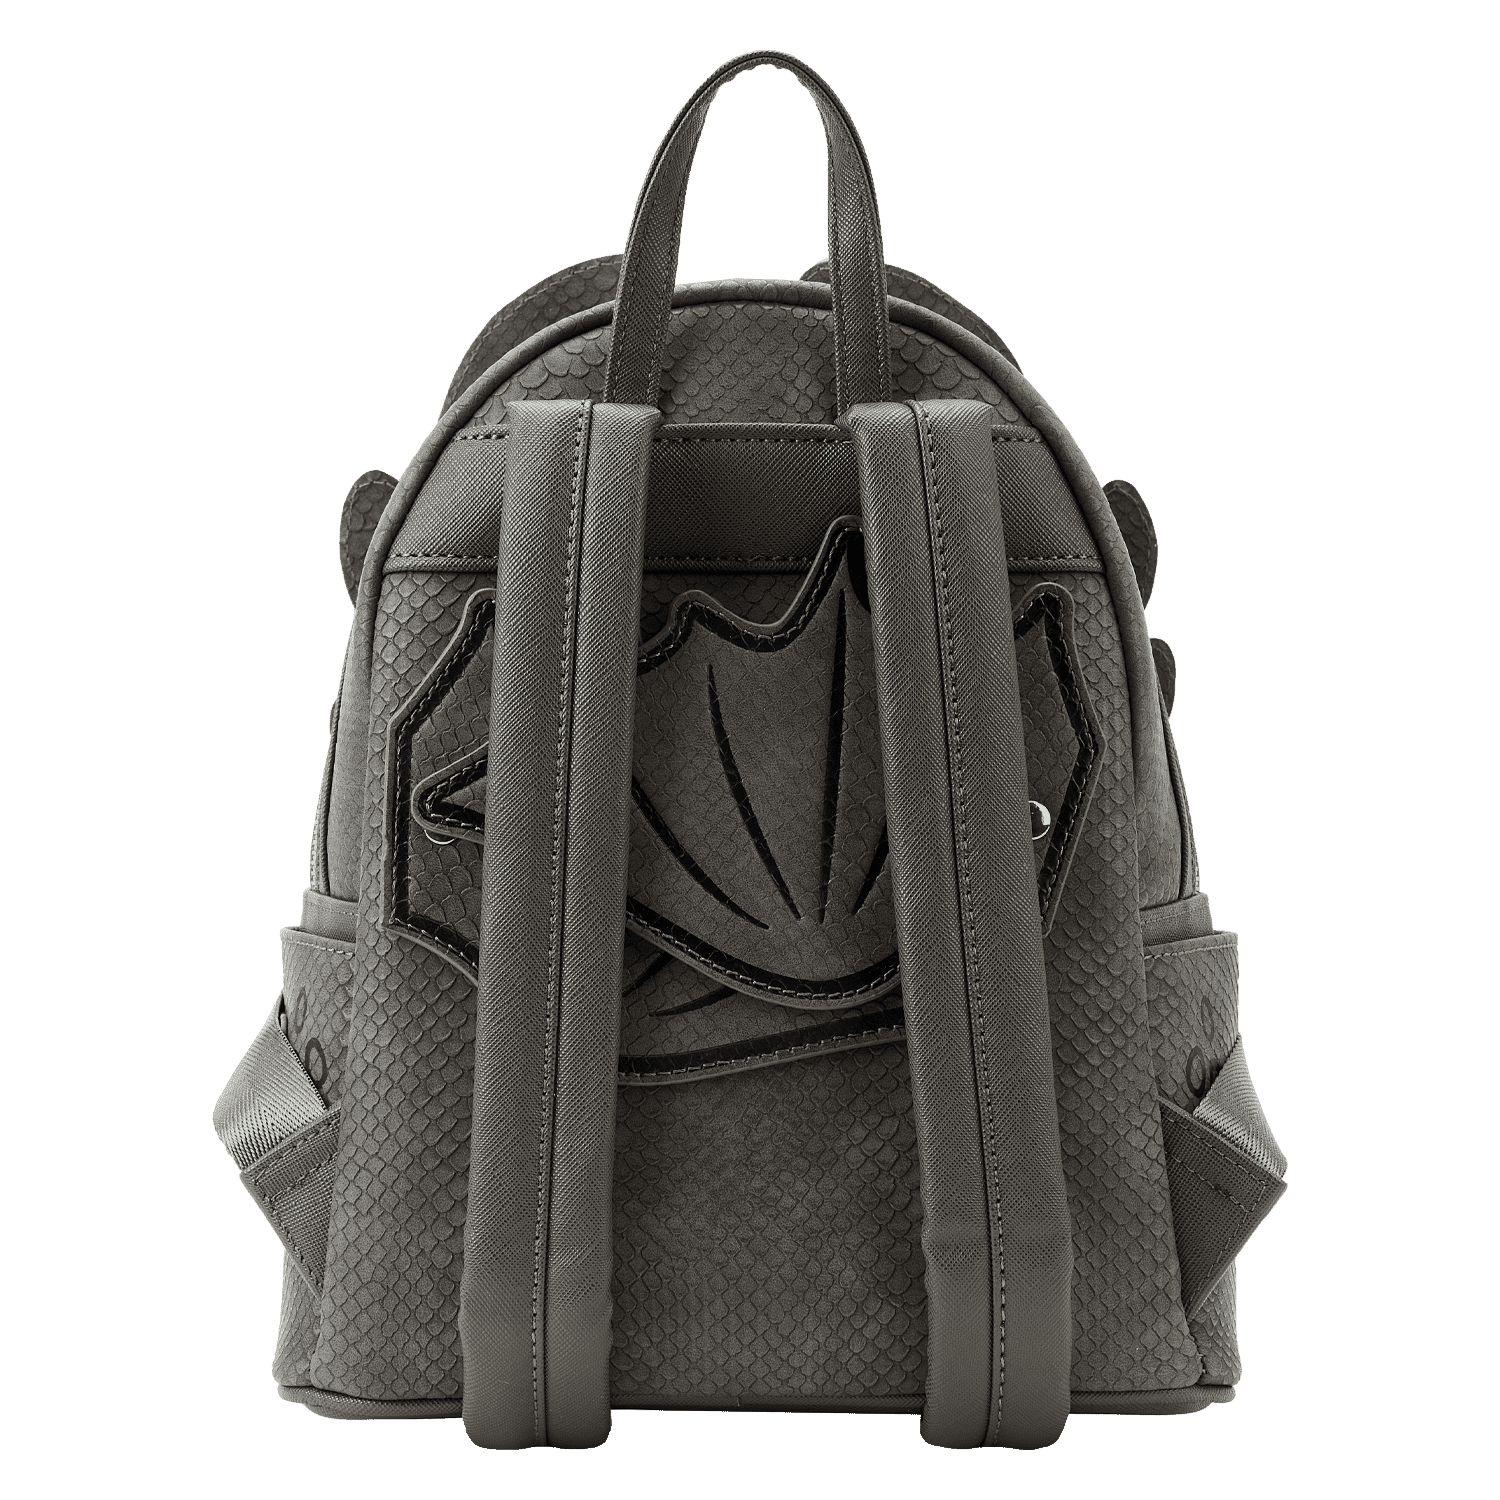 Buy How to Train Your Dragon Toothless Cosplay Mini Backpack at Loungefly.